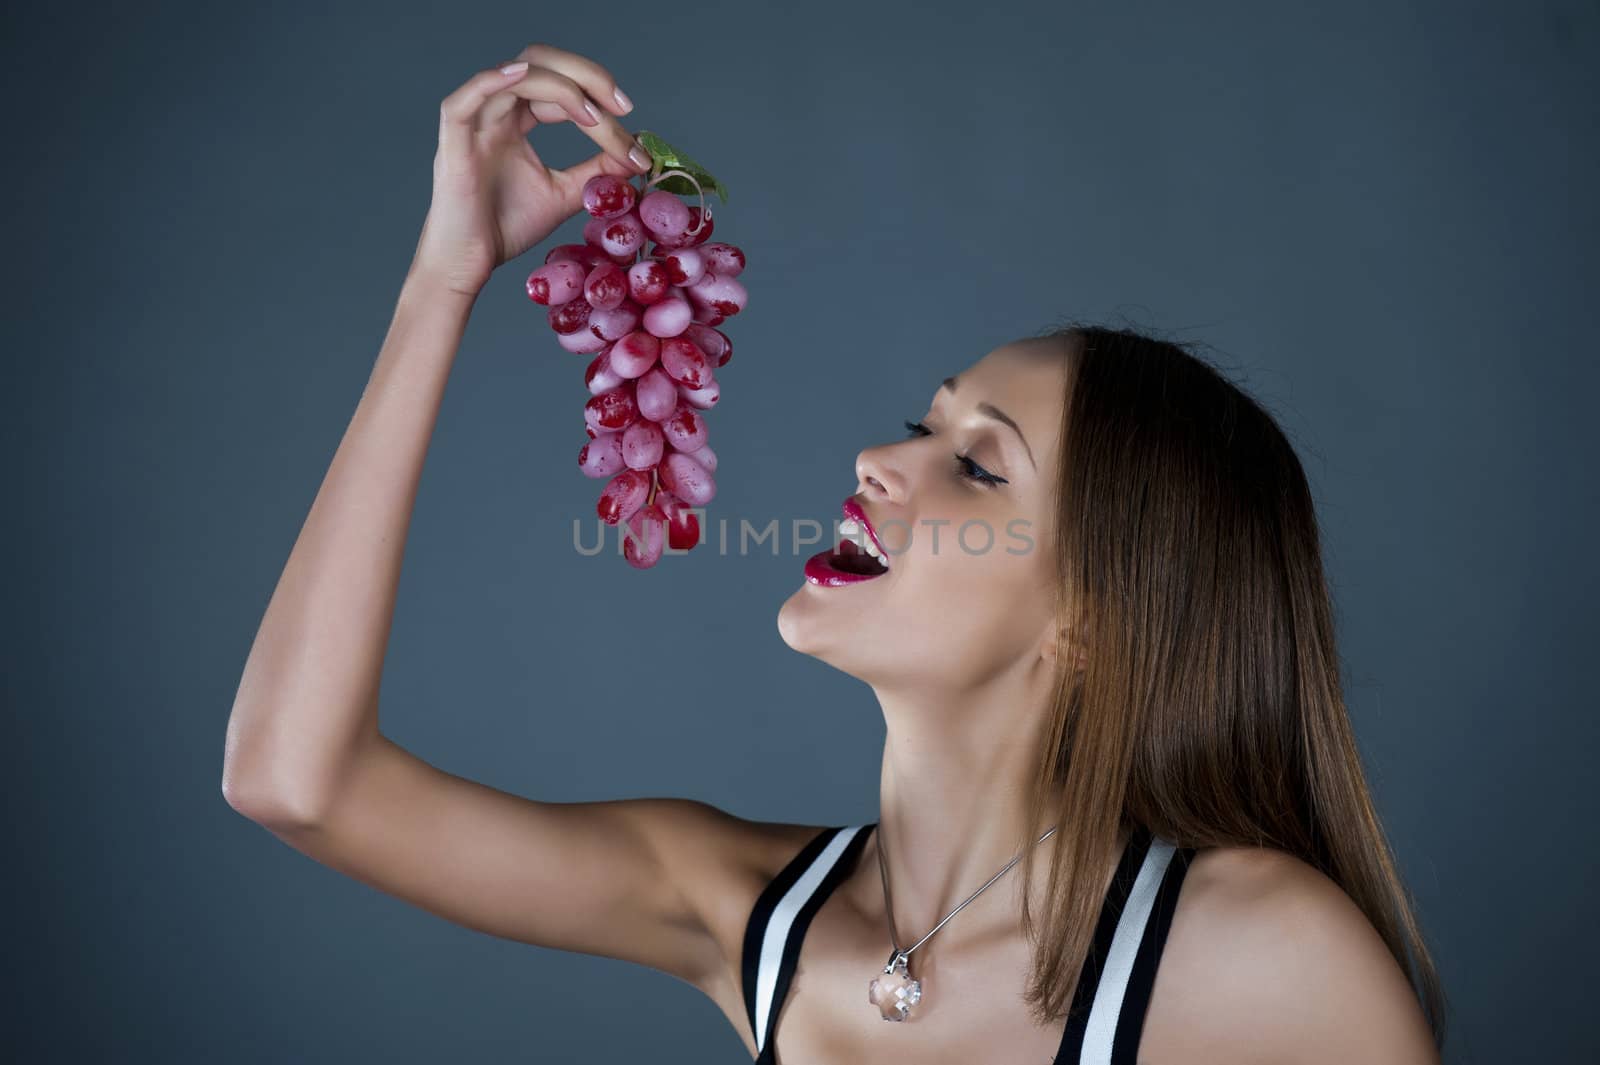 The beautiful girl with grapes in a hand